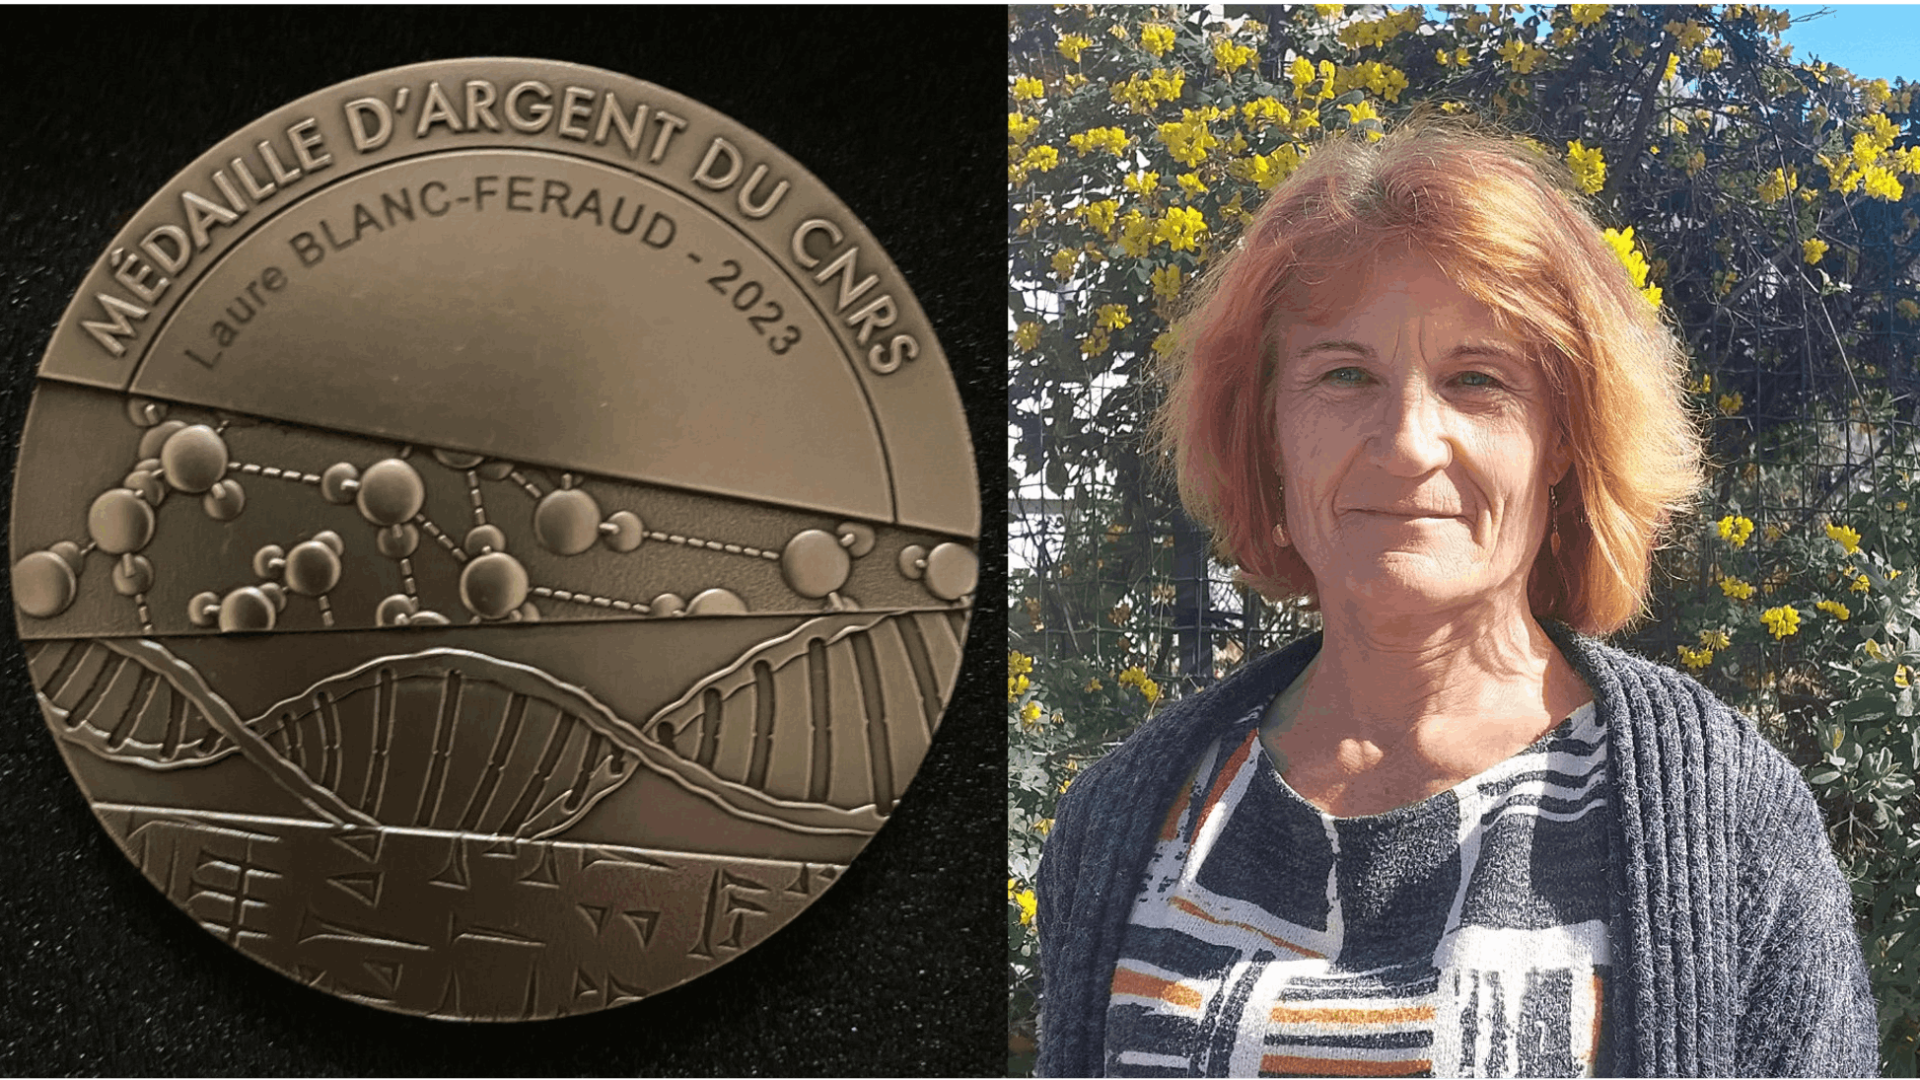 Meeting with Laure Blanc-Féraud (MORPHEME Team: i3S/iBV/INRIA), mathematician specialized in image processing, recently awarded the CNRS Silver Medal